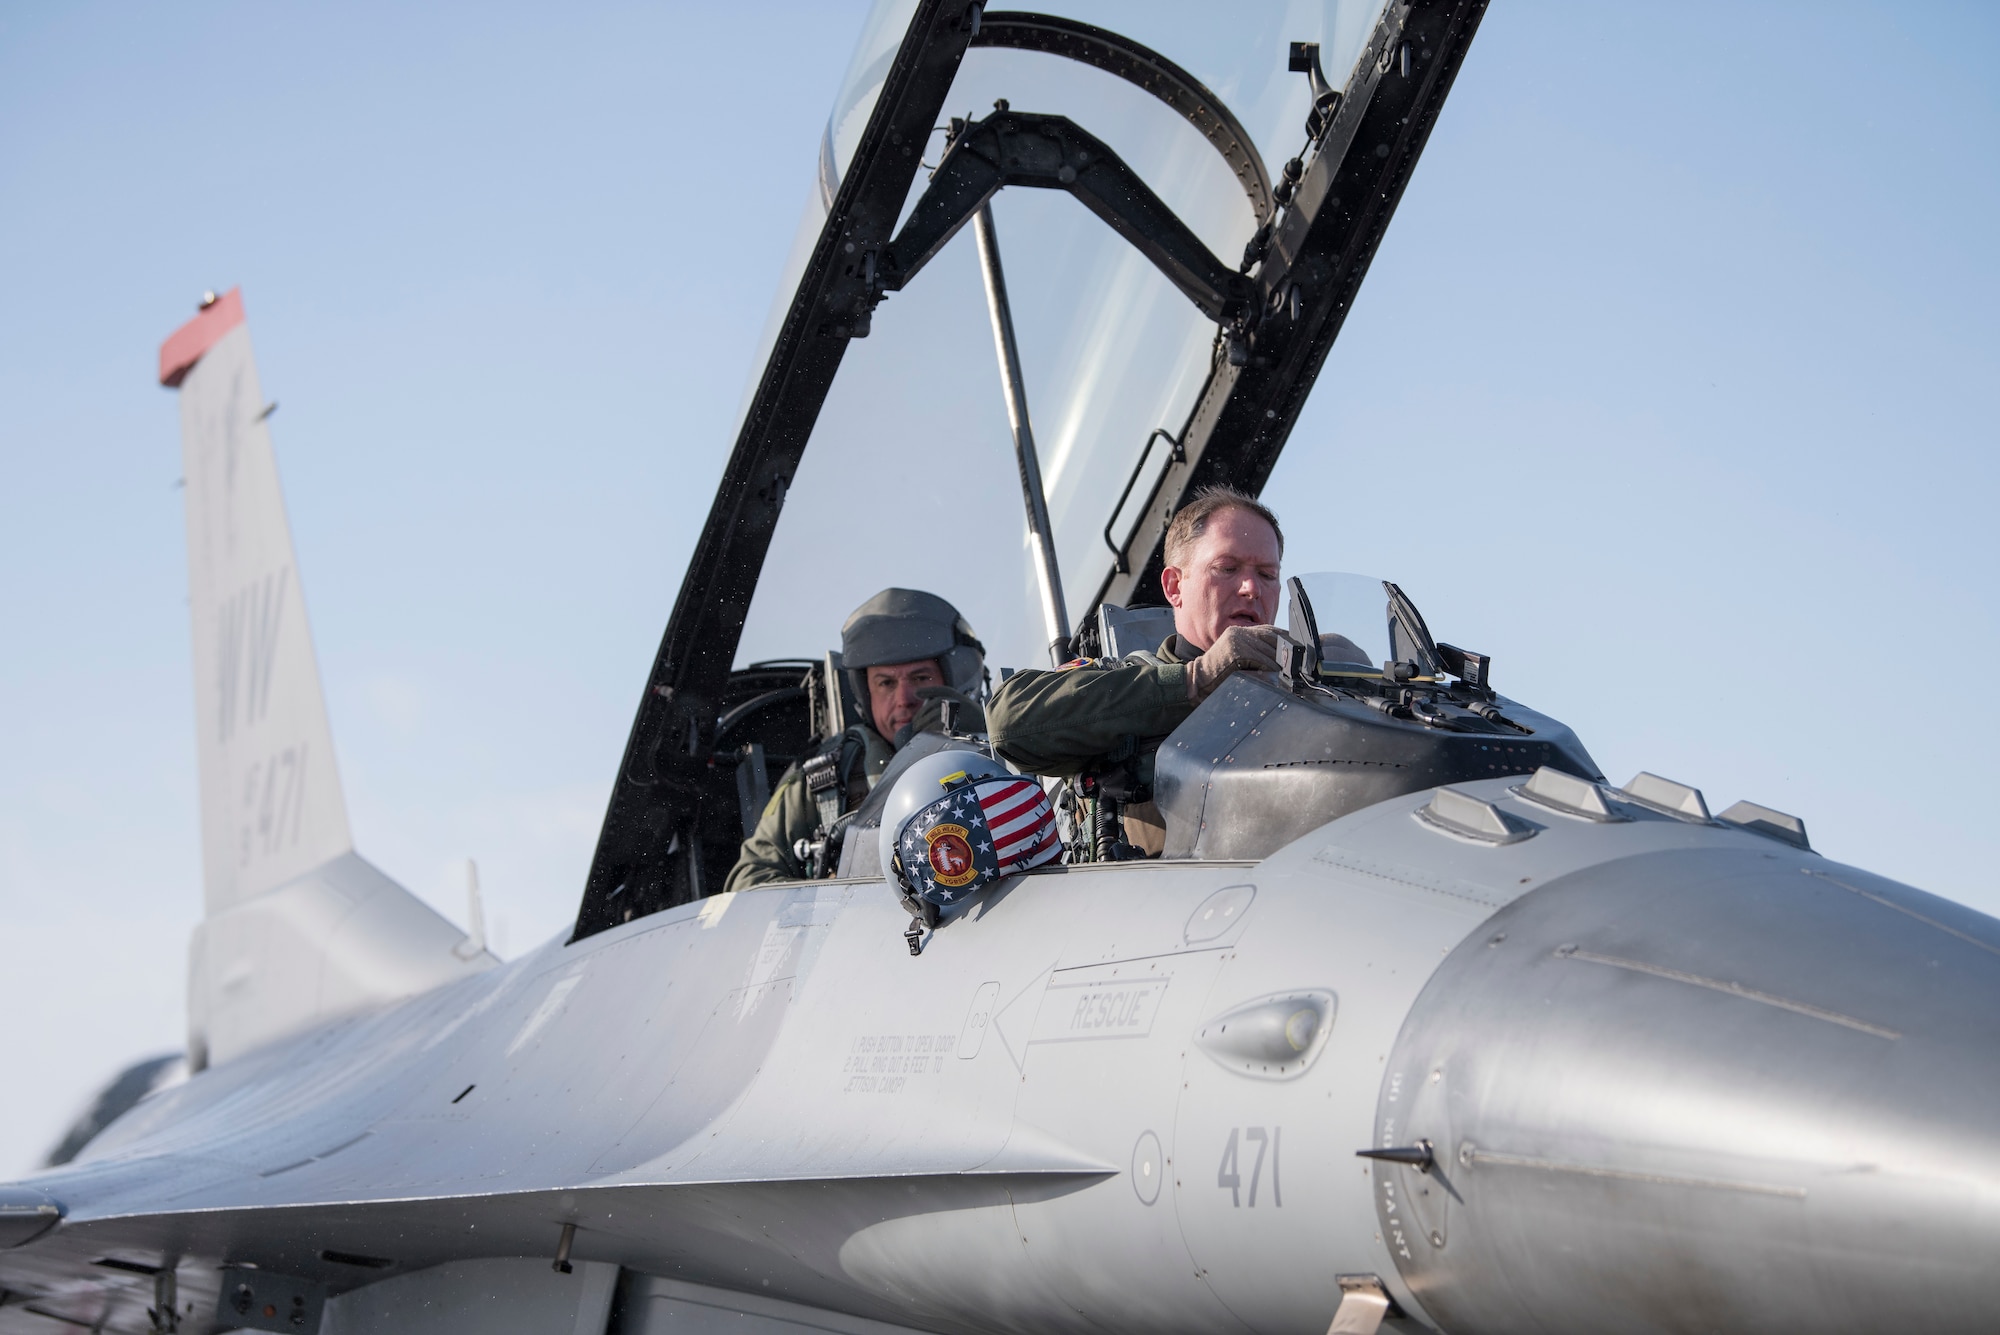 U.S. Air Force Col. Kristopher Struve, right, the 35th Fighter Wing commander, and Chief Master Sgt. John Alsvig, left, the 35th FW command chief, sit in an F-16 Fighting Falcon at Misawa Air Base, Japan, Dec. 28, 1018. Struve, a seasoned F-16 Fighting Falcon pilot with more than 2,500 flying hours, gave Alsvig a familiarization flight, allowing him to see first hand what pilots endure during a routine flight. (U.S. Air Force photo by Staff Sgt. B.A. Chase)